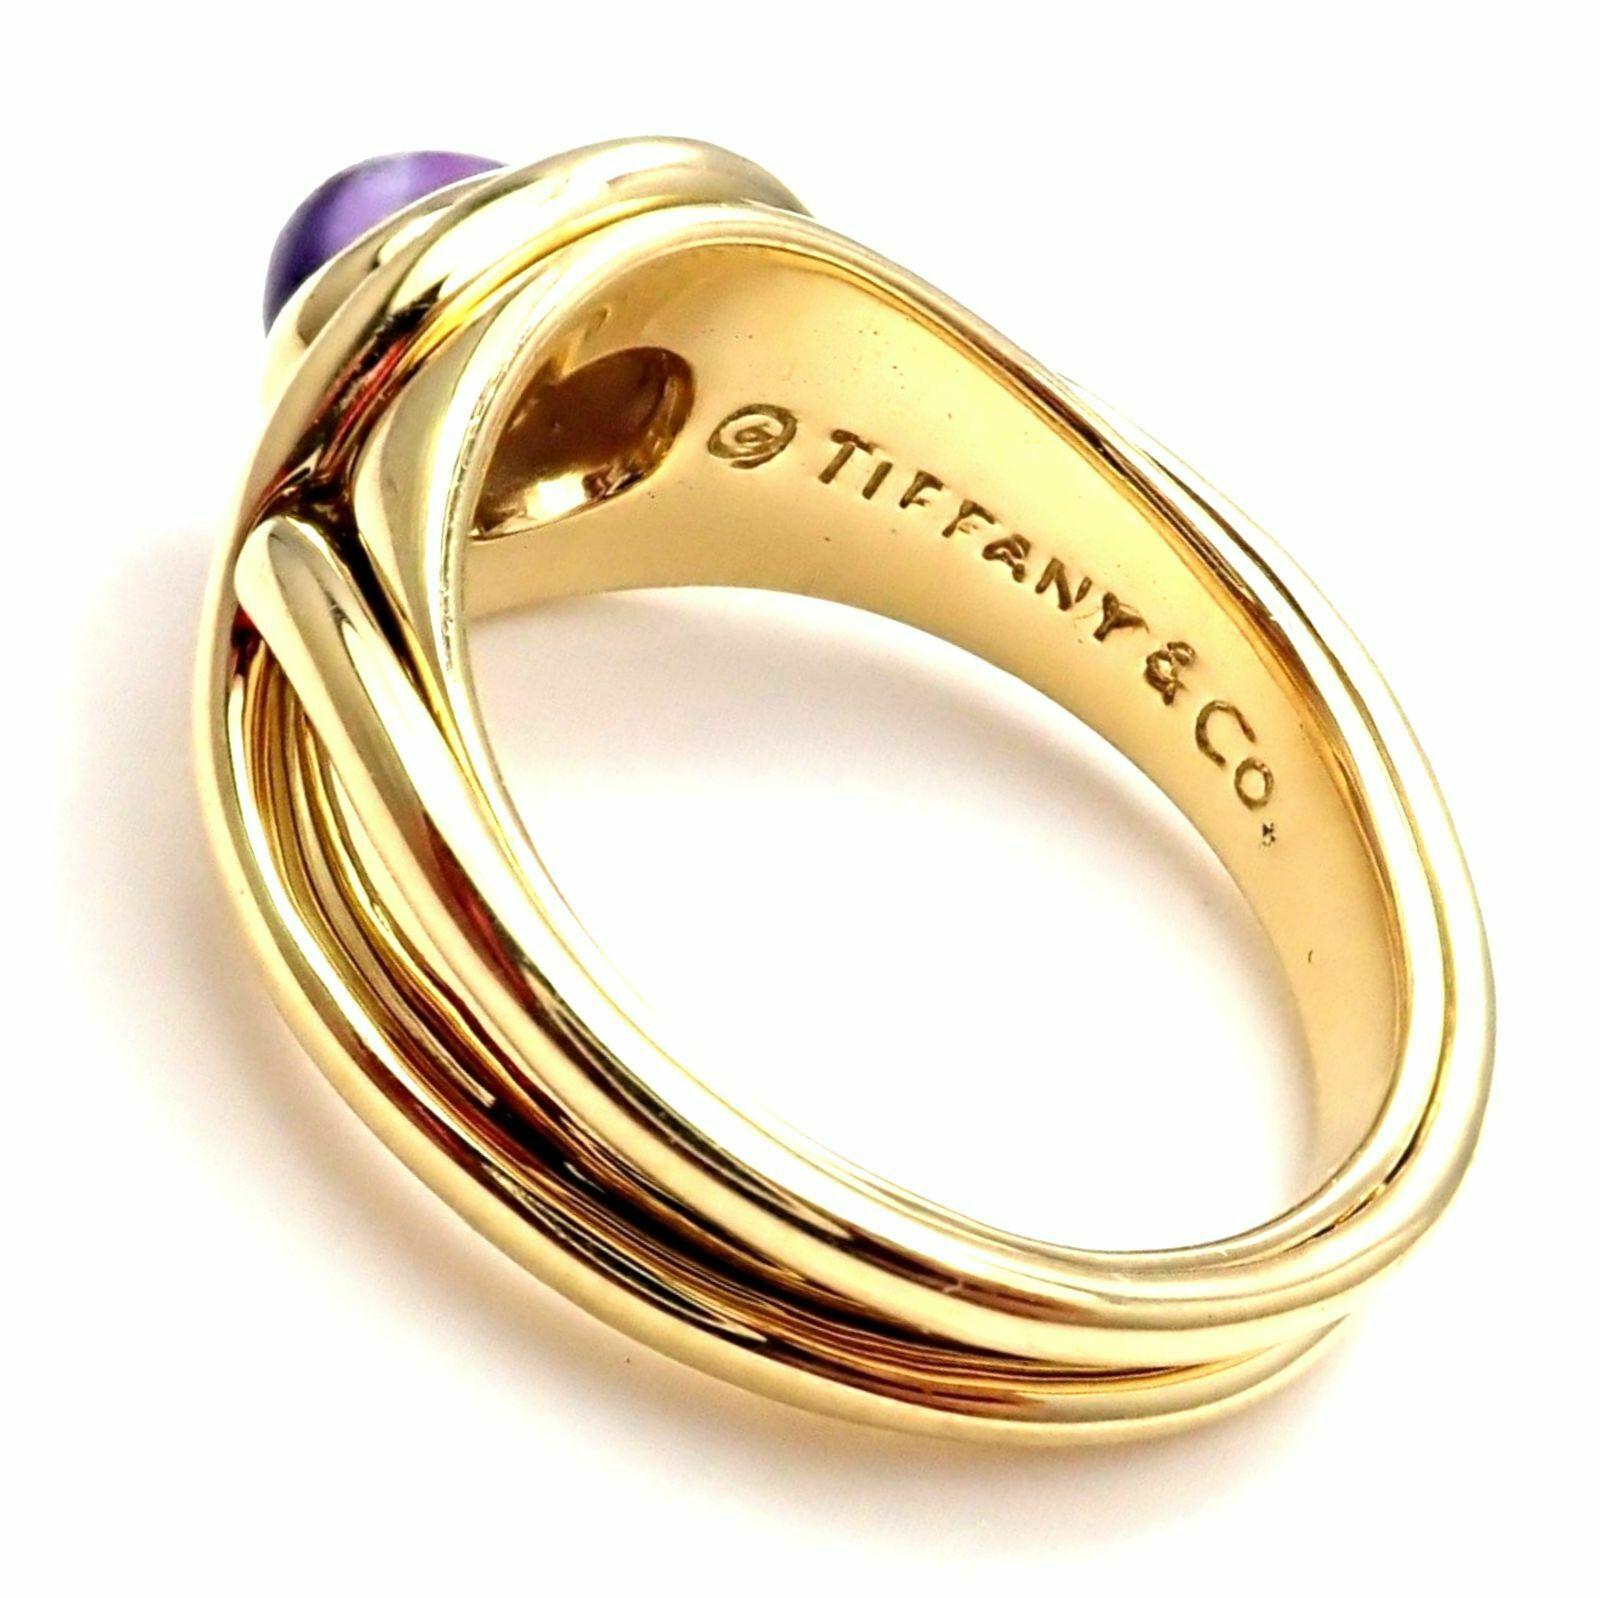 18k Yellow Gold Amethyst Twist Band Ring from Tiffany & Co. 
With 1 oval amethyst stone 5mm x 6.5mm
Measurements: 
Ring Size: 7 (resize available)
Weight:  9.9 grams
Width at Top: 10mm
Stamped Hallmarks: Tiffany & Co 750
*Free Shipping within the